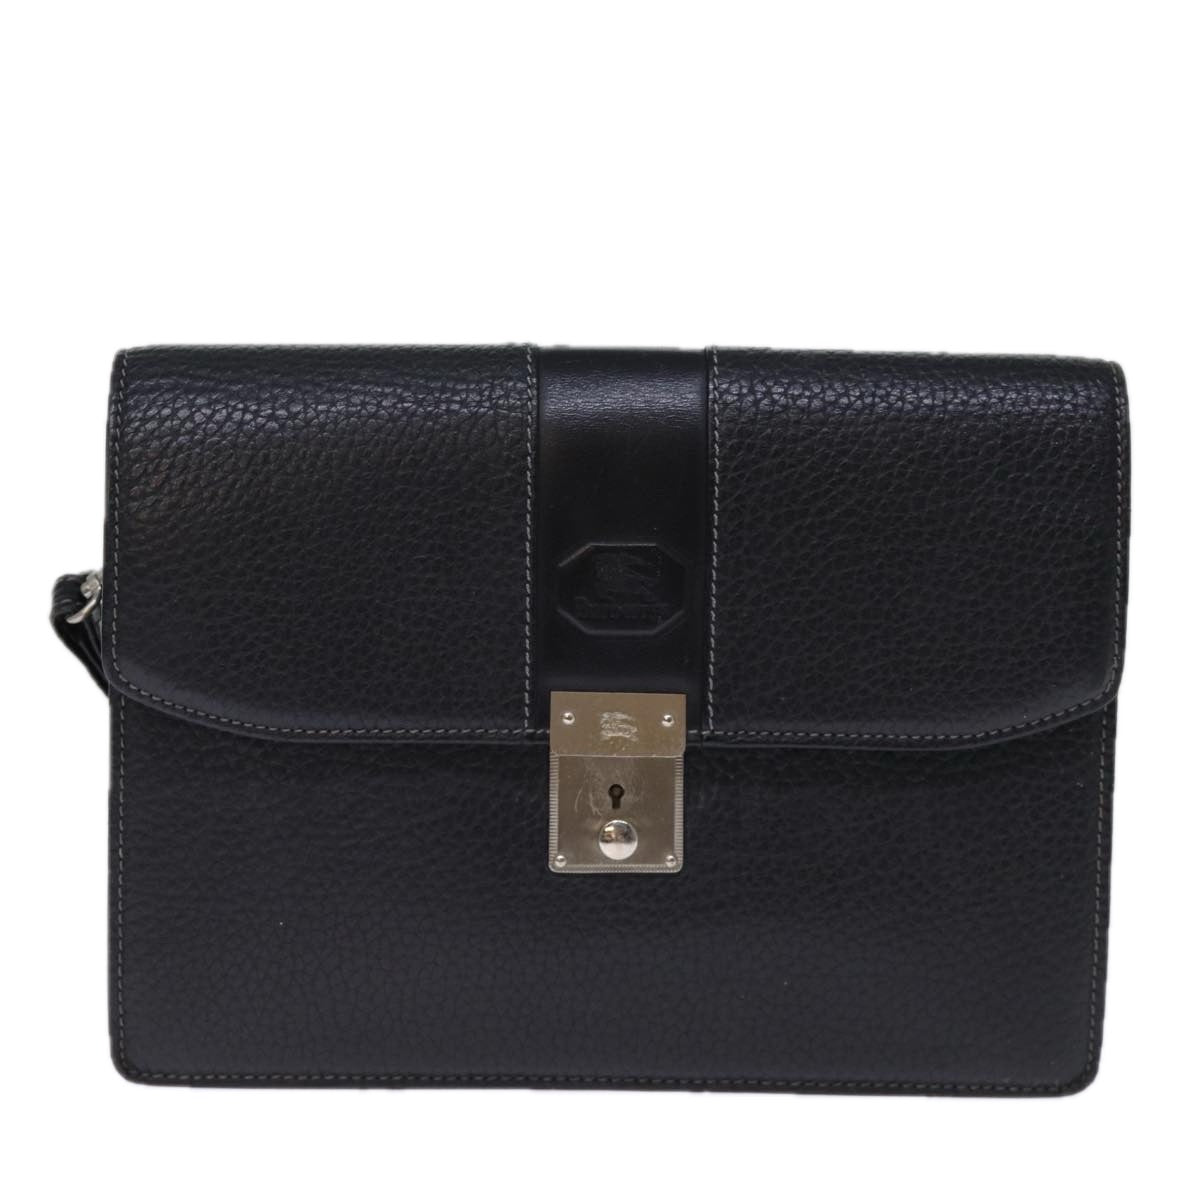 Burberrys Clutch Bag Leather Black Auth bs13915